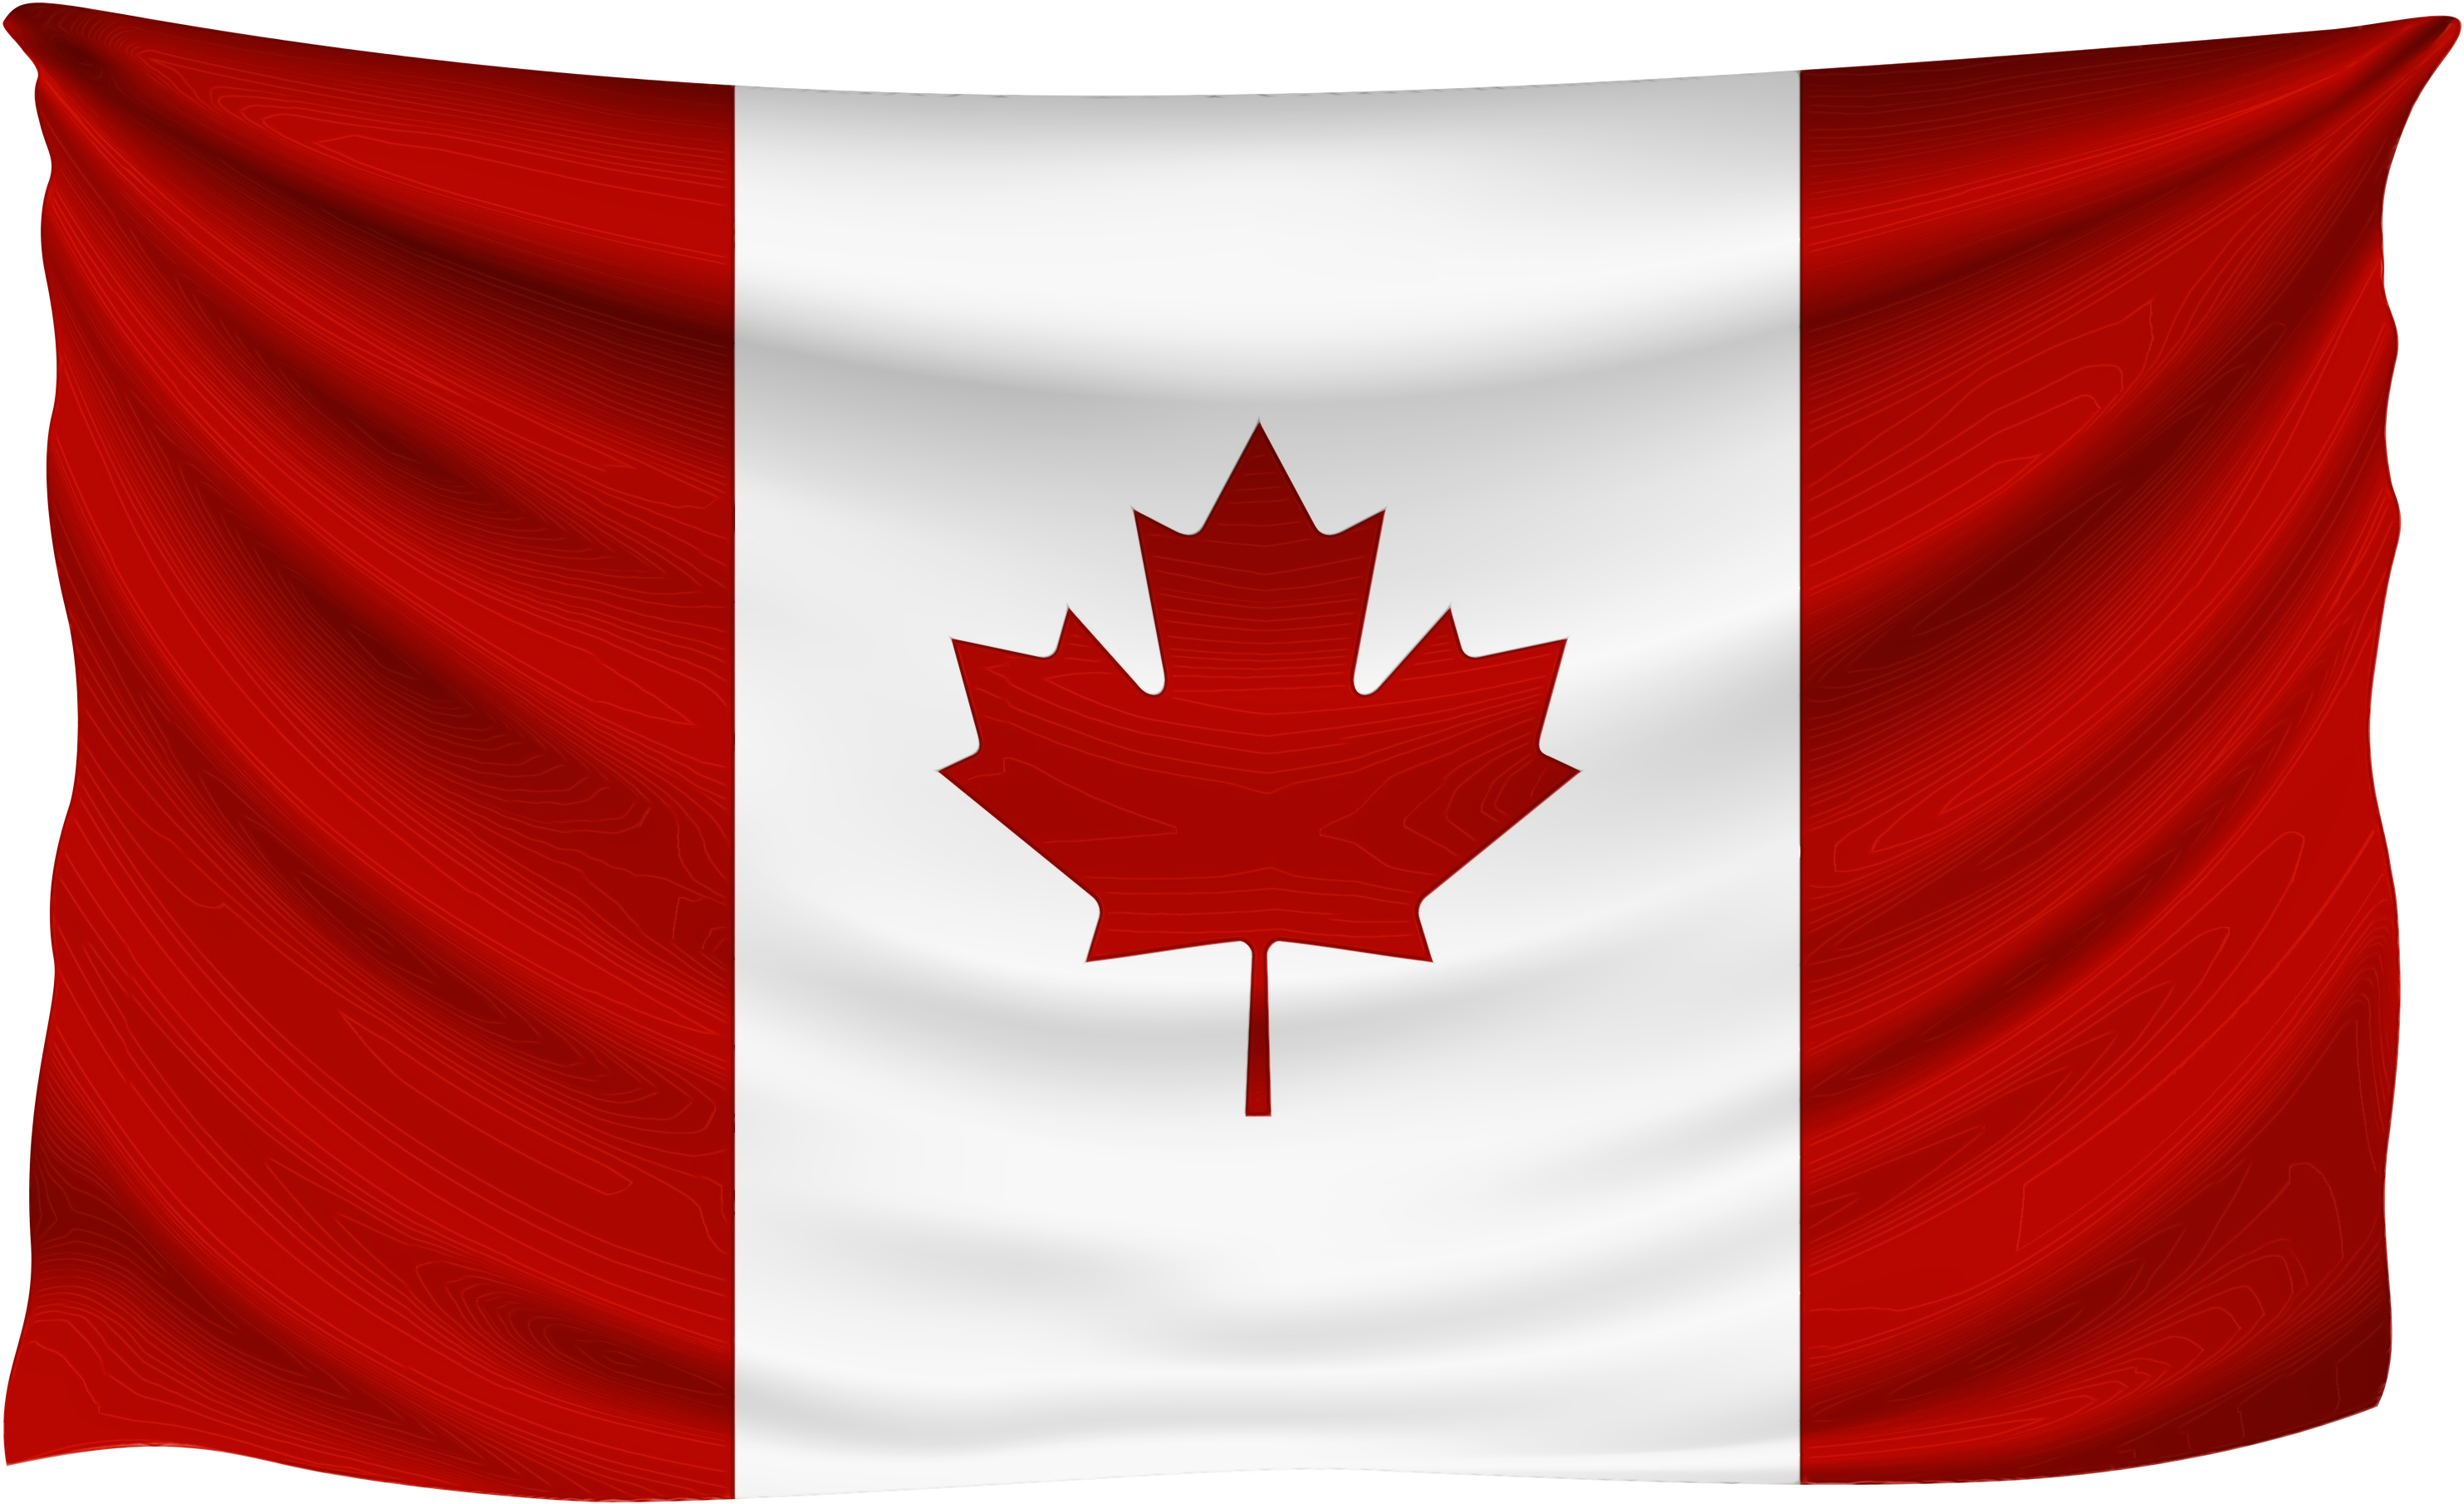 Flag Of Canada Union Jack Maple Leaf - Canada Flag Gif Animated, Hd Png Download